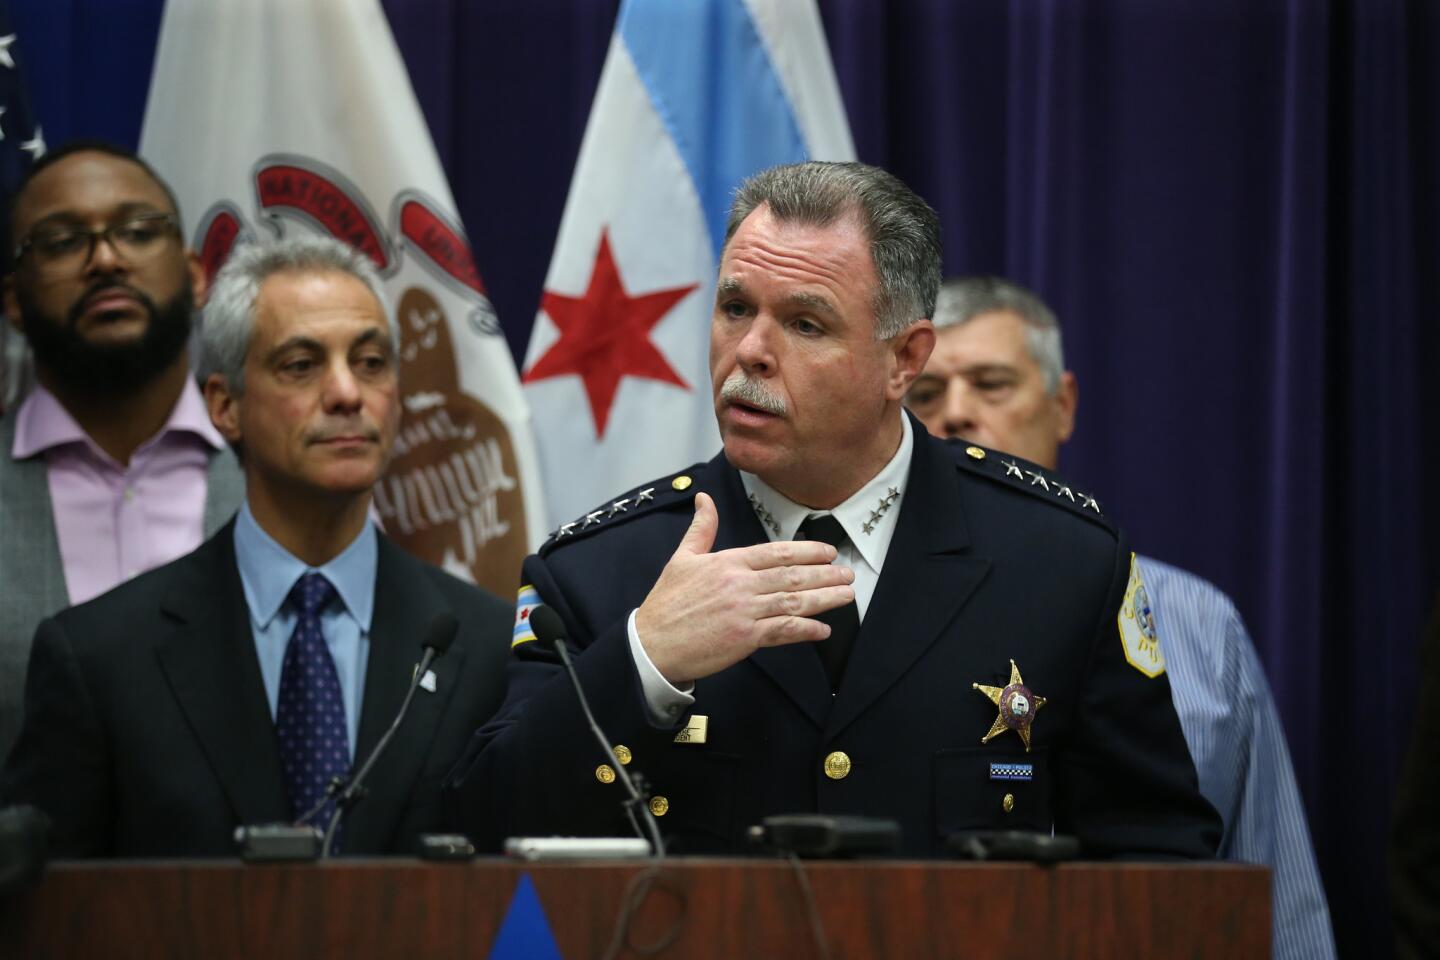 Chicago police Superintendent Garry McCarthy, right, joined by Mayor Rahm Emanuel, second from left, speaks at a Nov. 24, 2015, news conference at the Chicago Police Deptartment headquarters regarding the shooting death of Laquan McDonald.